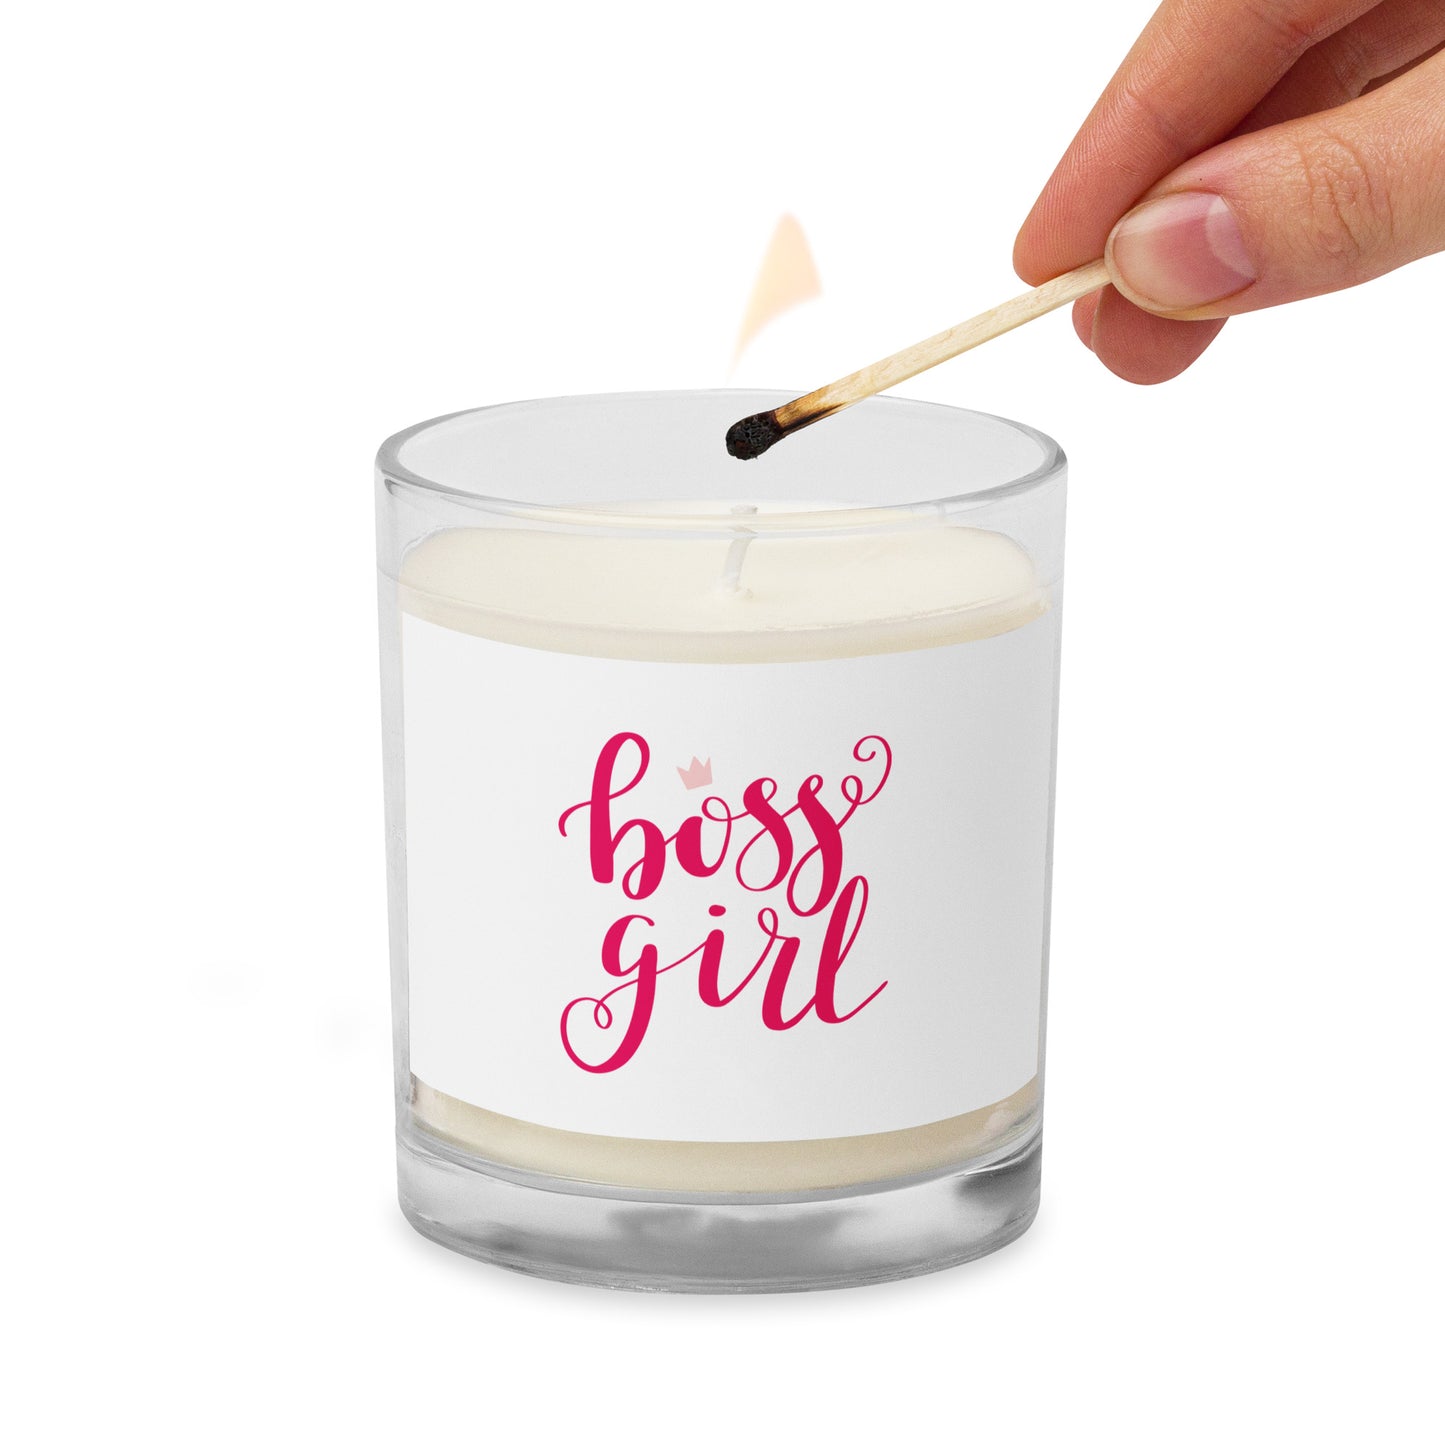 Glass jar soy wax candle girl boss by BG